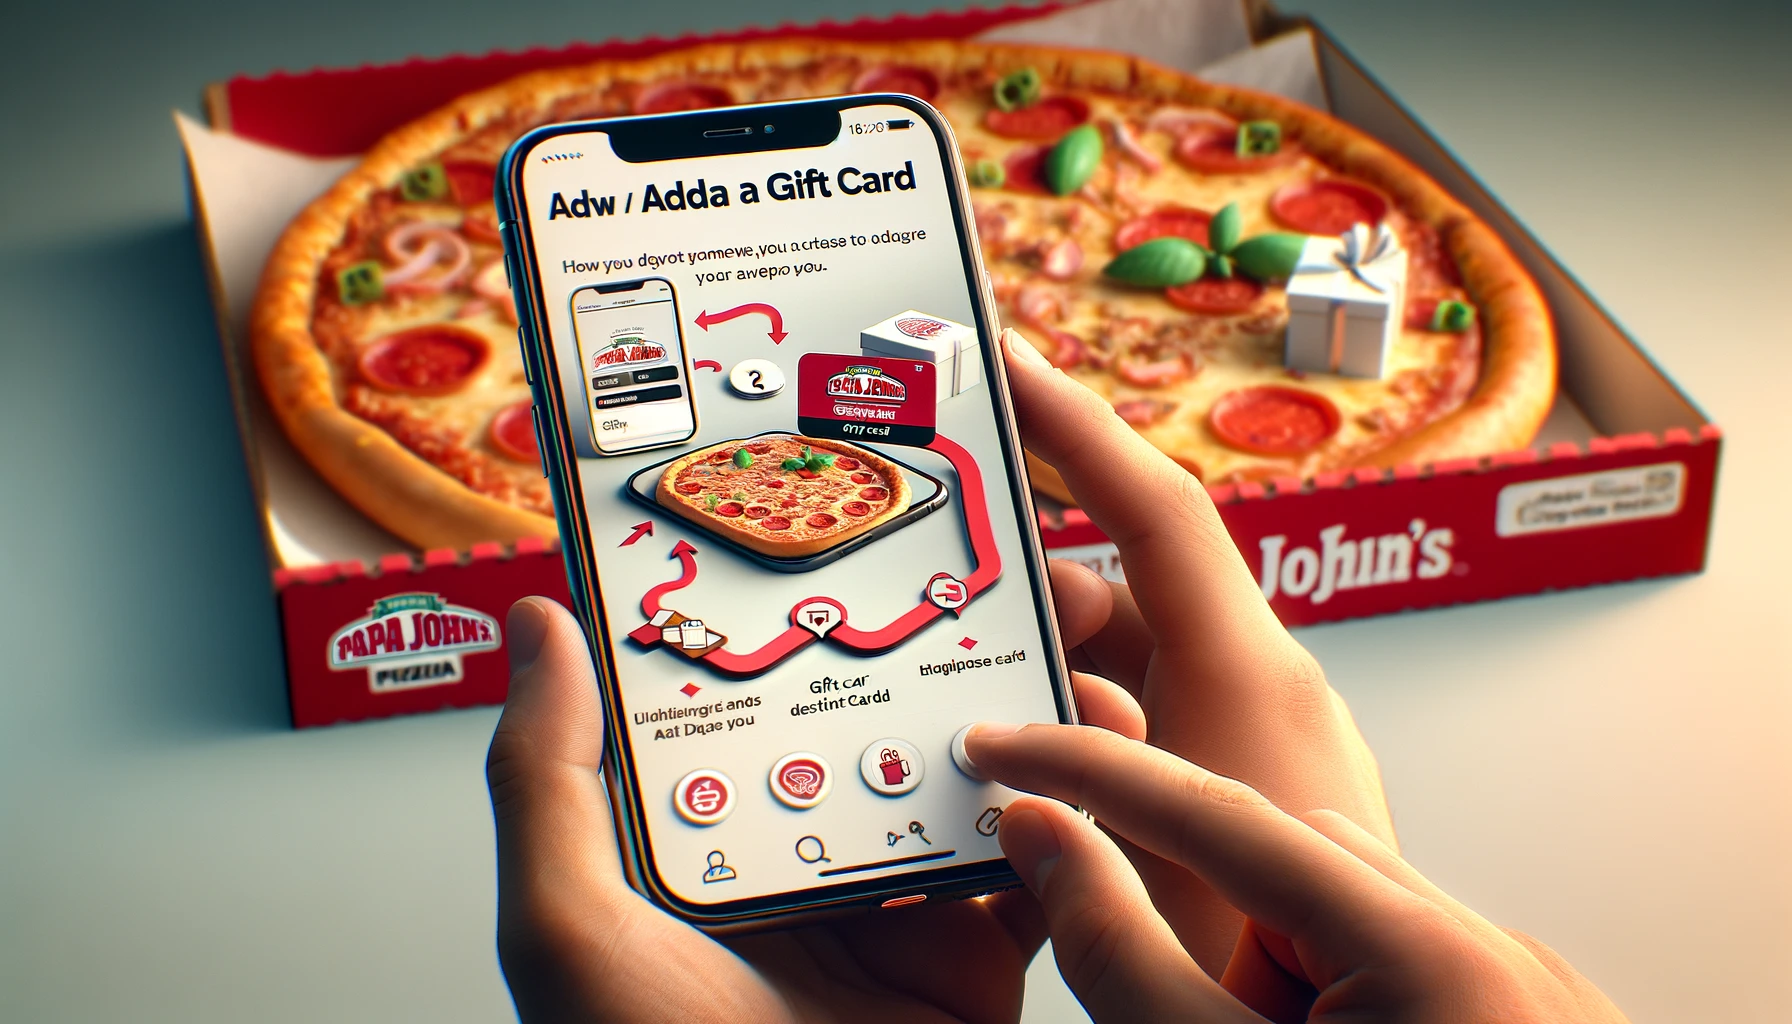 How to Add Gift Card to Papa John's App